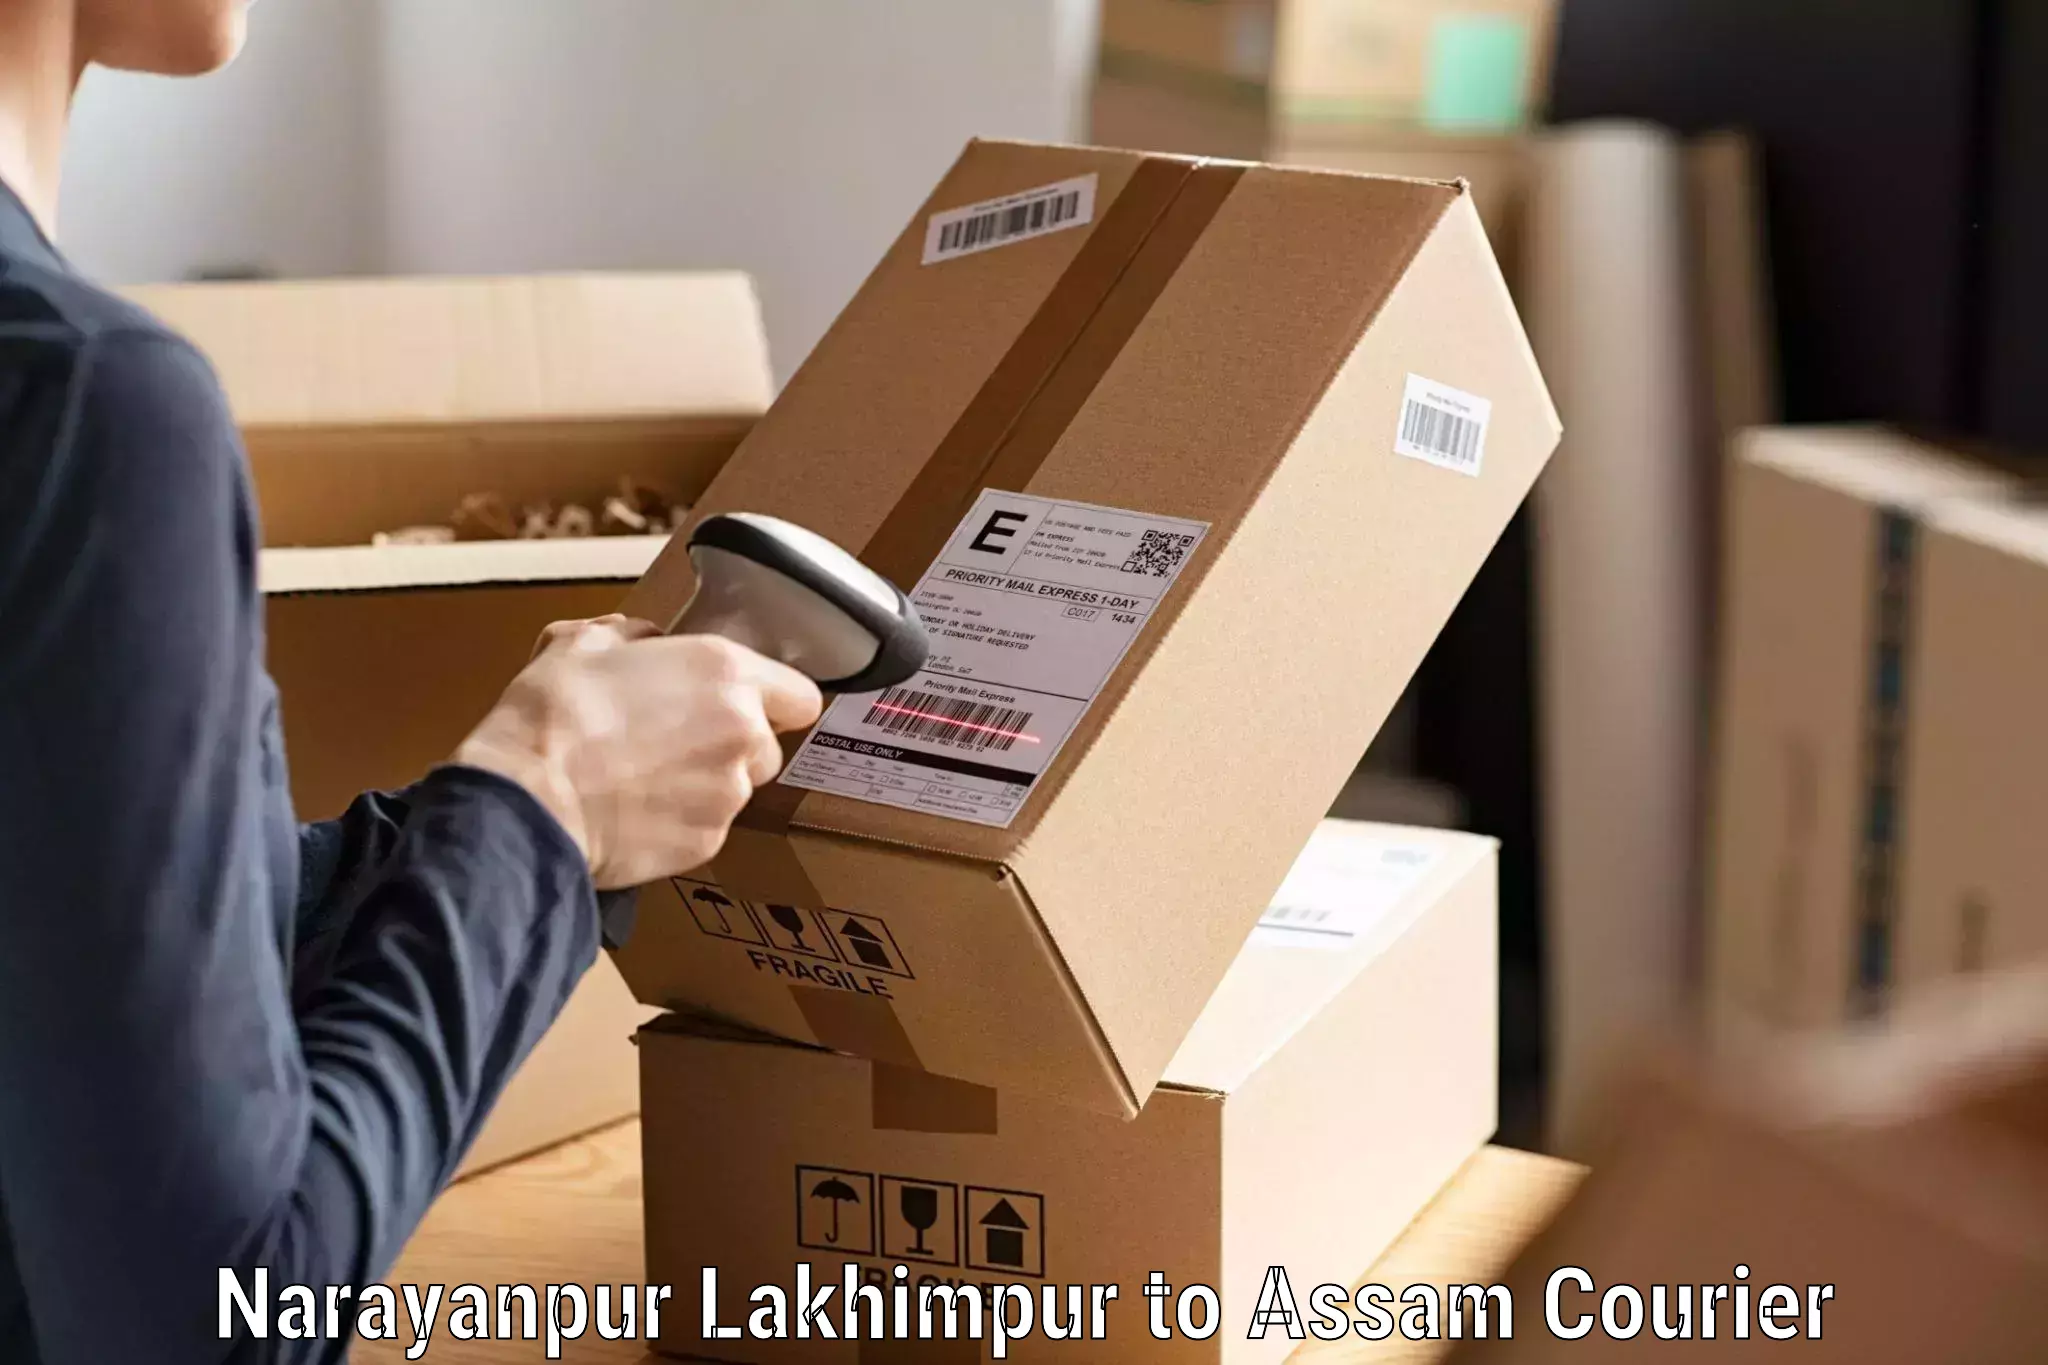 Reliable parcel services Narayanpur Lakhimpur to Kampur